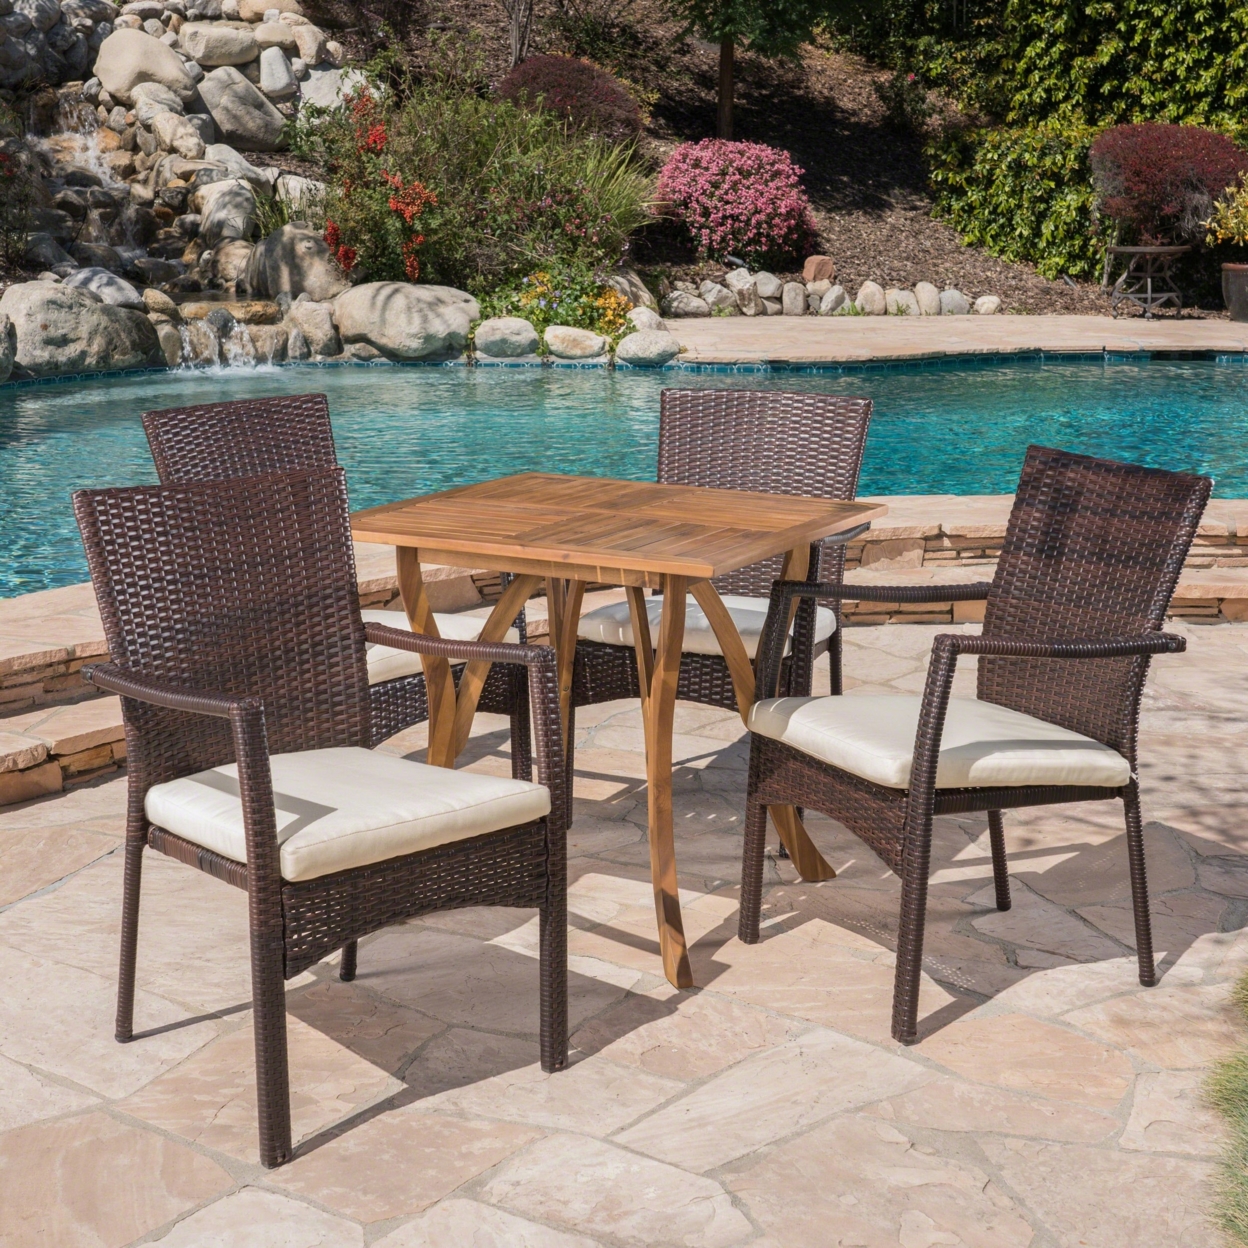 Alva Outdoor 5 Piece Acacia Wood/ Wicker Dining Set With Cushions, Teak Finish And Brown With CrÌ¬me